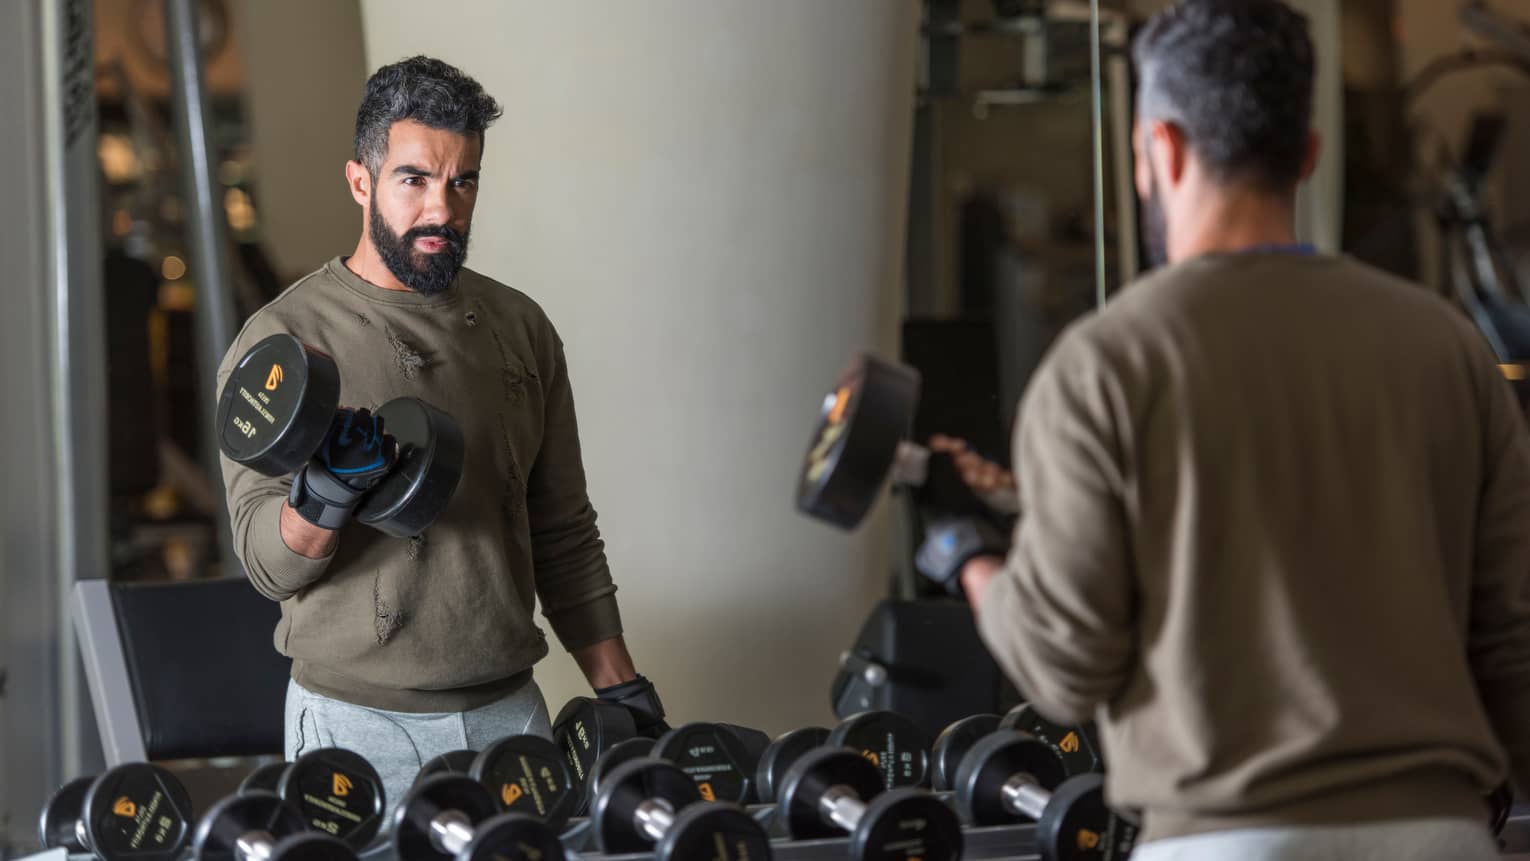 Man with beard wearing casual sweatshirt and sweatpants stands looks in gym mirror, lifts large hand weights